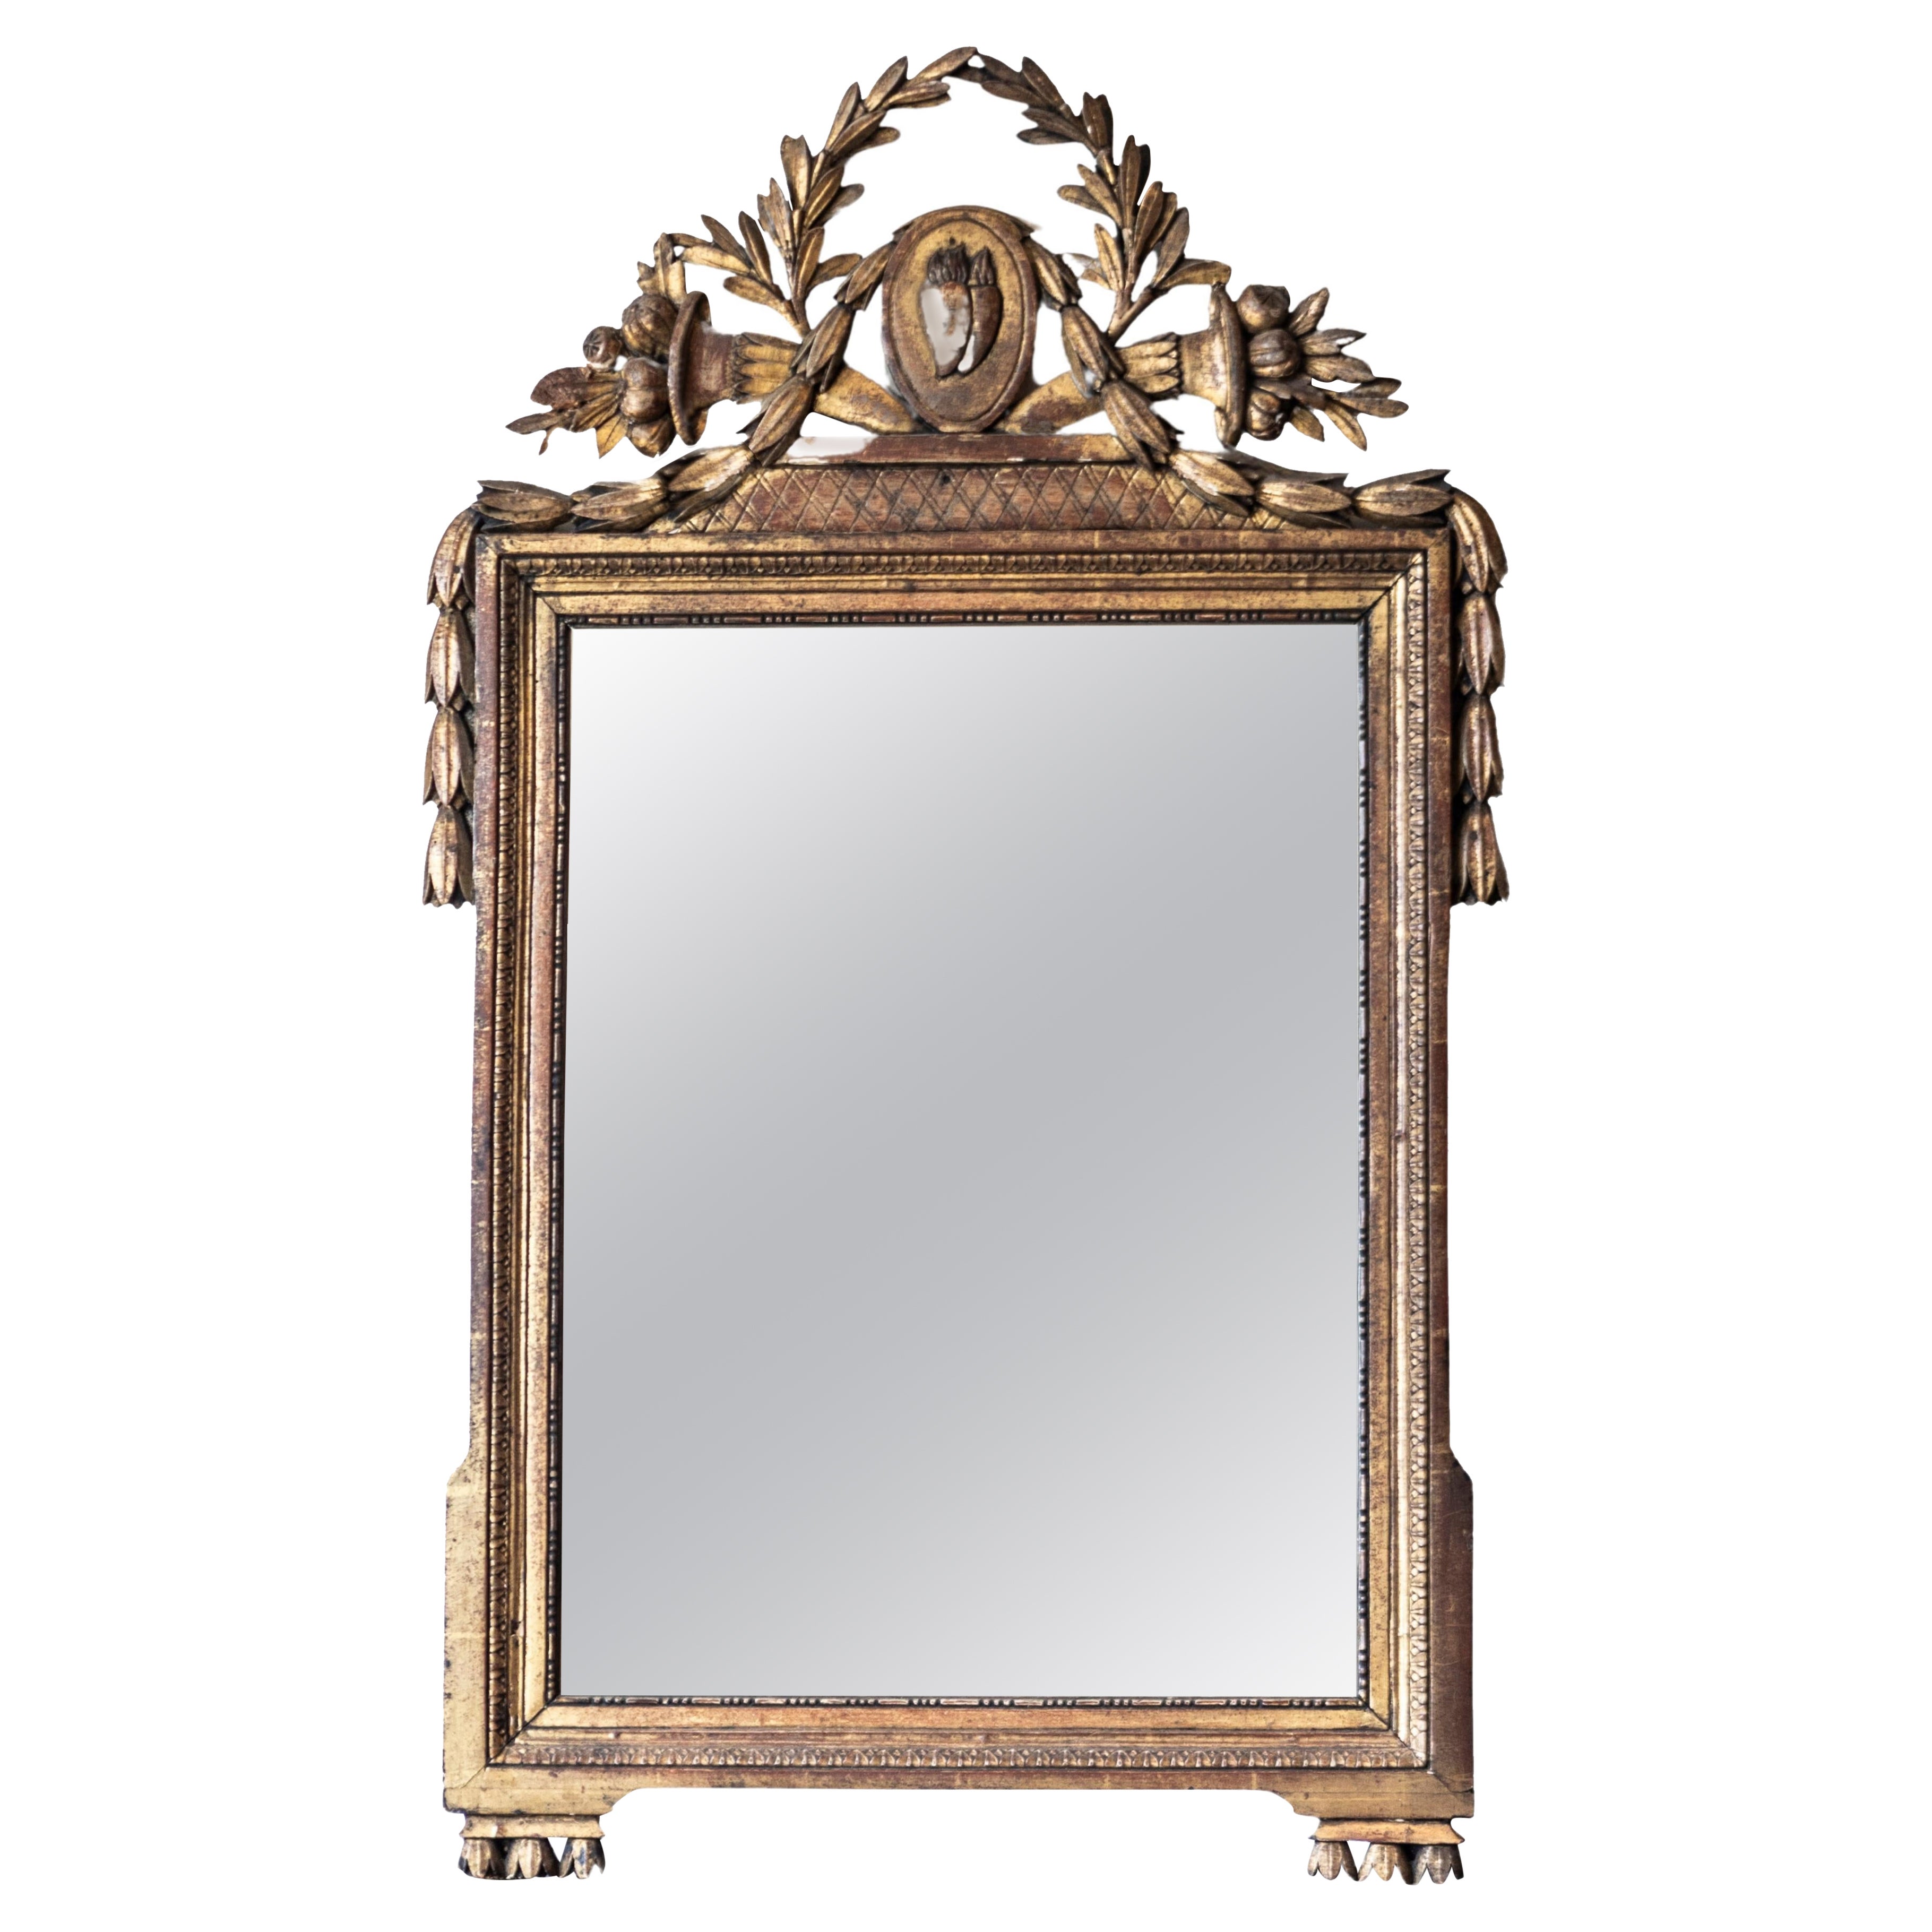 French Louis XVI Period 18th Century Giltwood Mirror with Carved Hearts on Fire